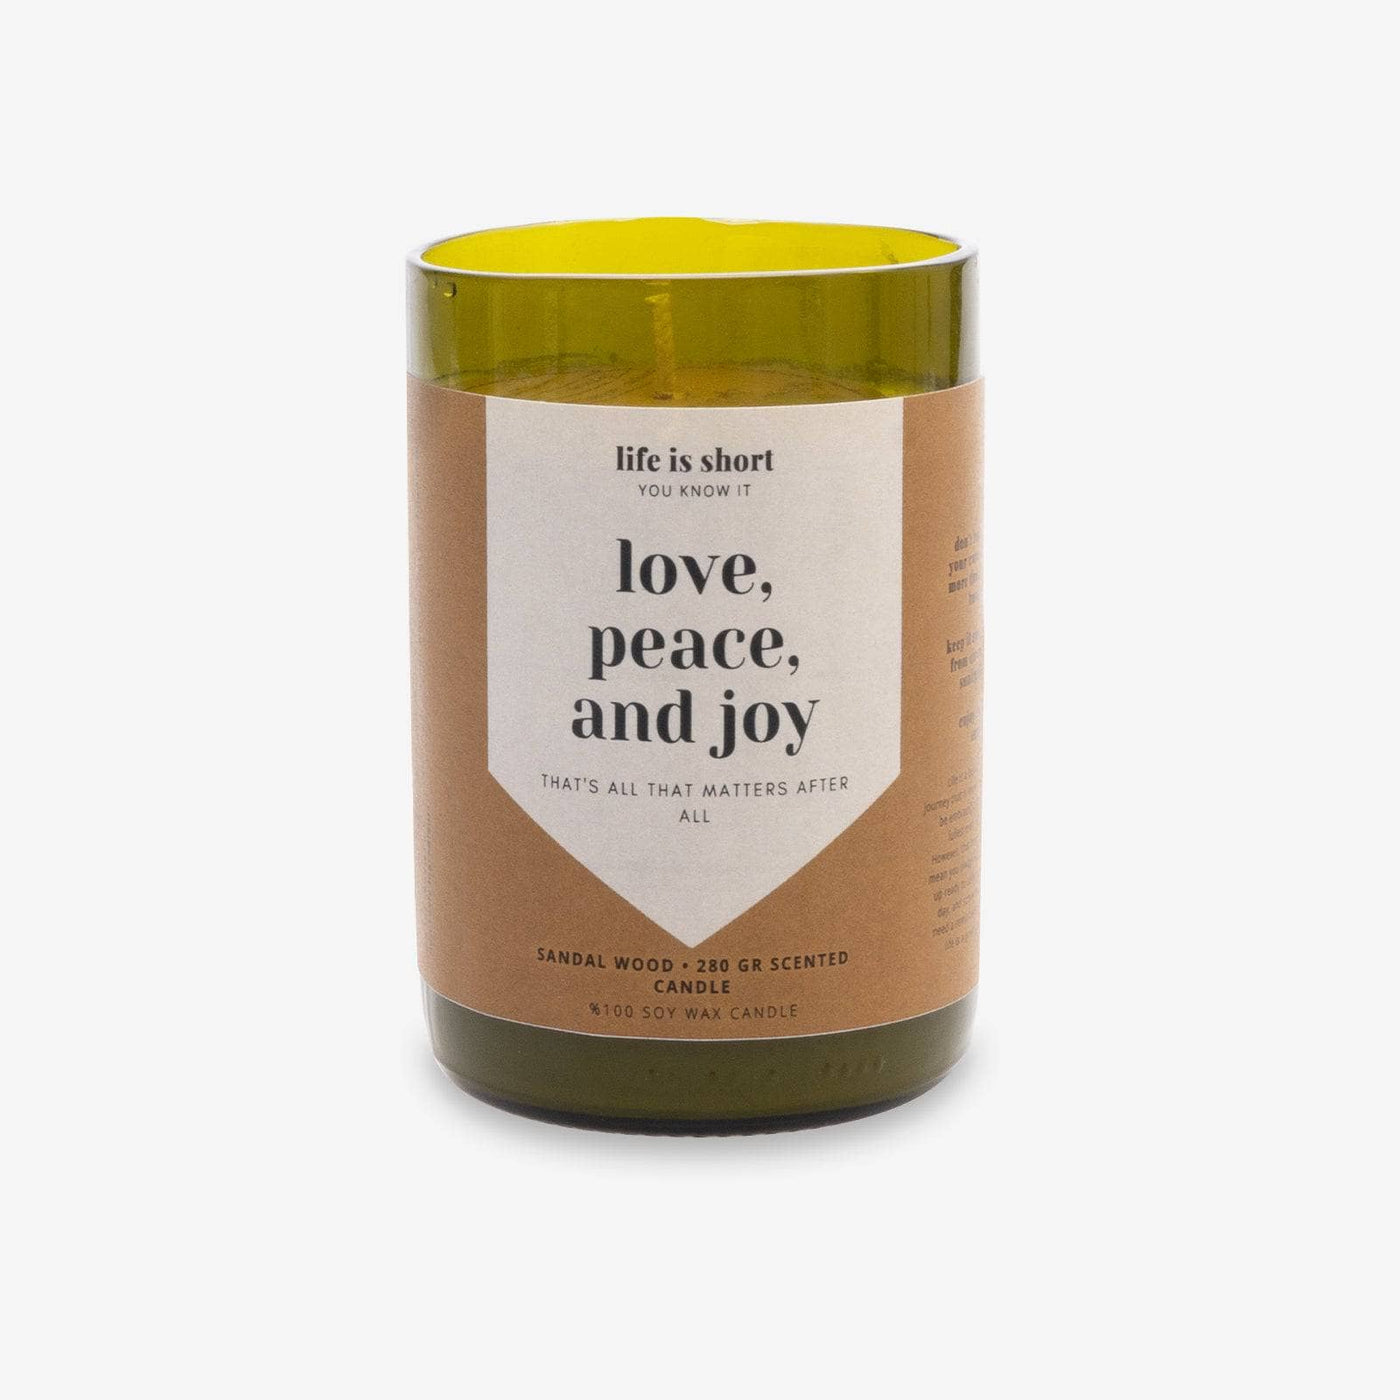 Love, Peace and Joy Soy Wax Candle, Amber, 285 g Candles sazy.com